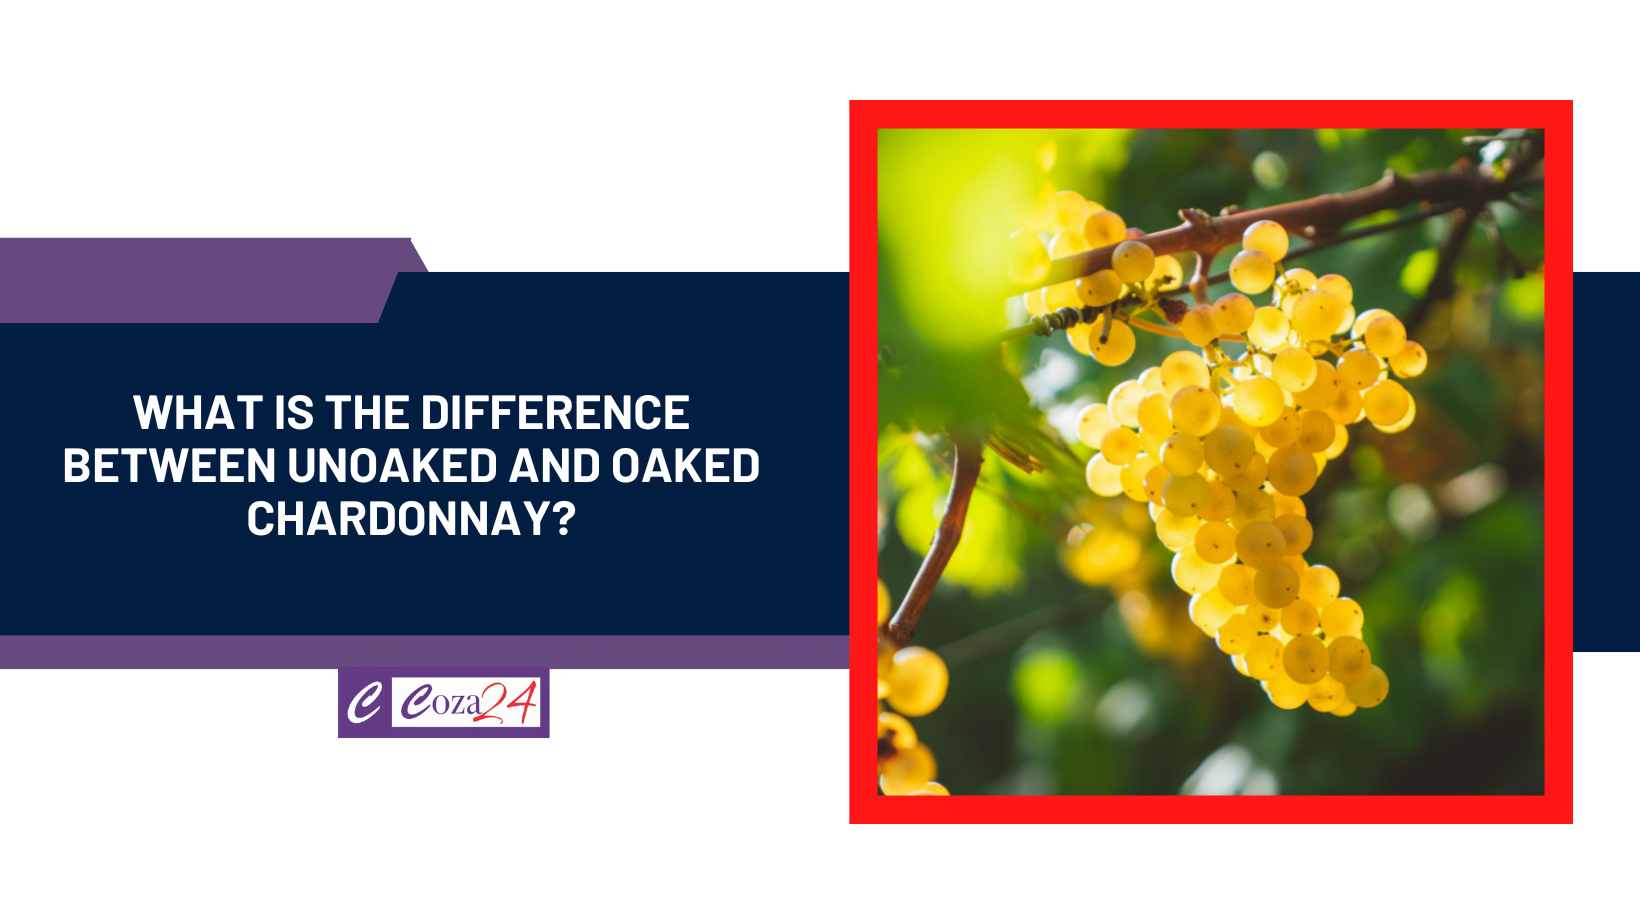 What Is The Difference Between Unoaked and Oaked Chardonnay?